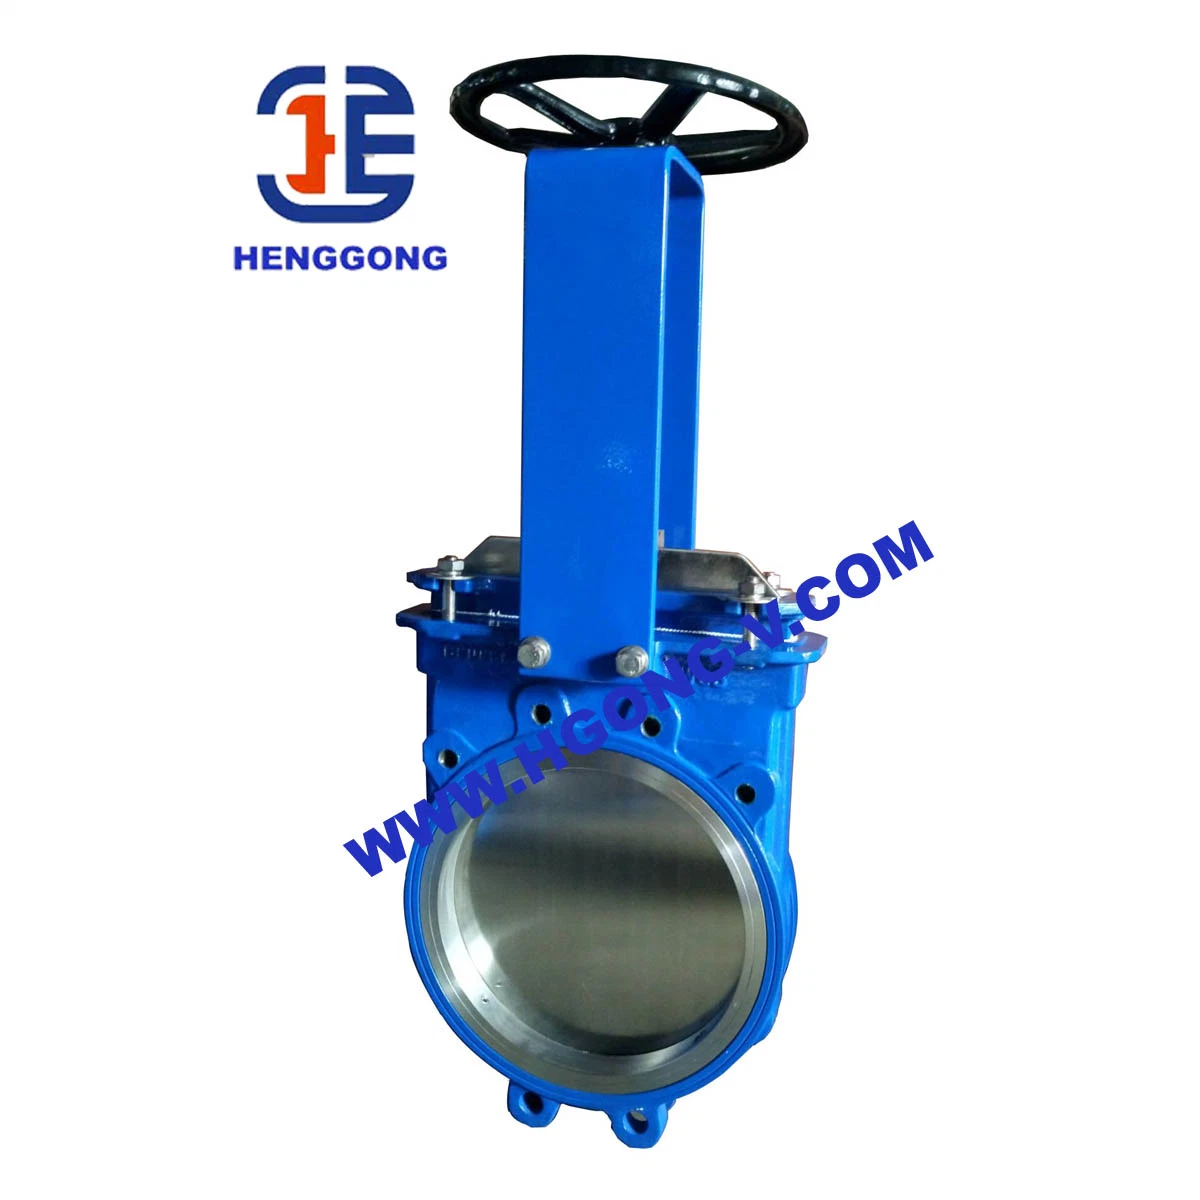 API/DIN Cast Iron Gg25 Stainless Steel Iron Electric and Pneumatic Slurry Sluice Knife Gate Valve with Pneumatic